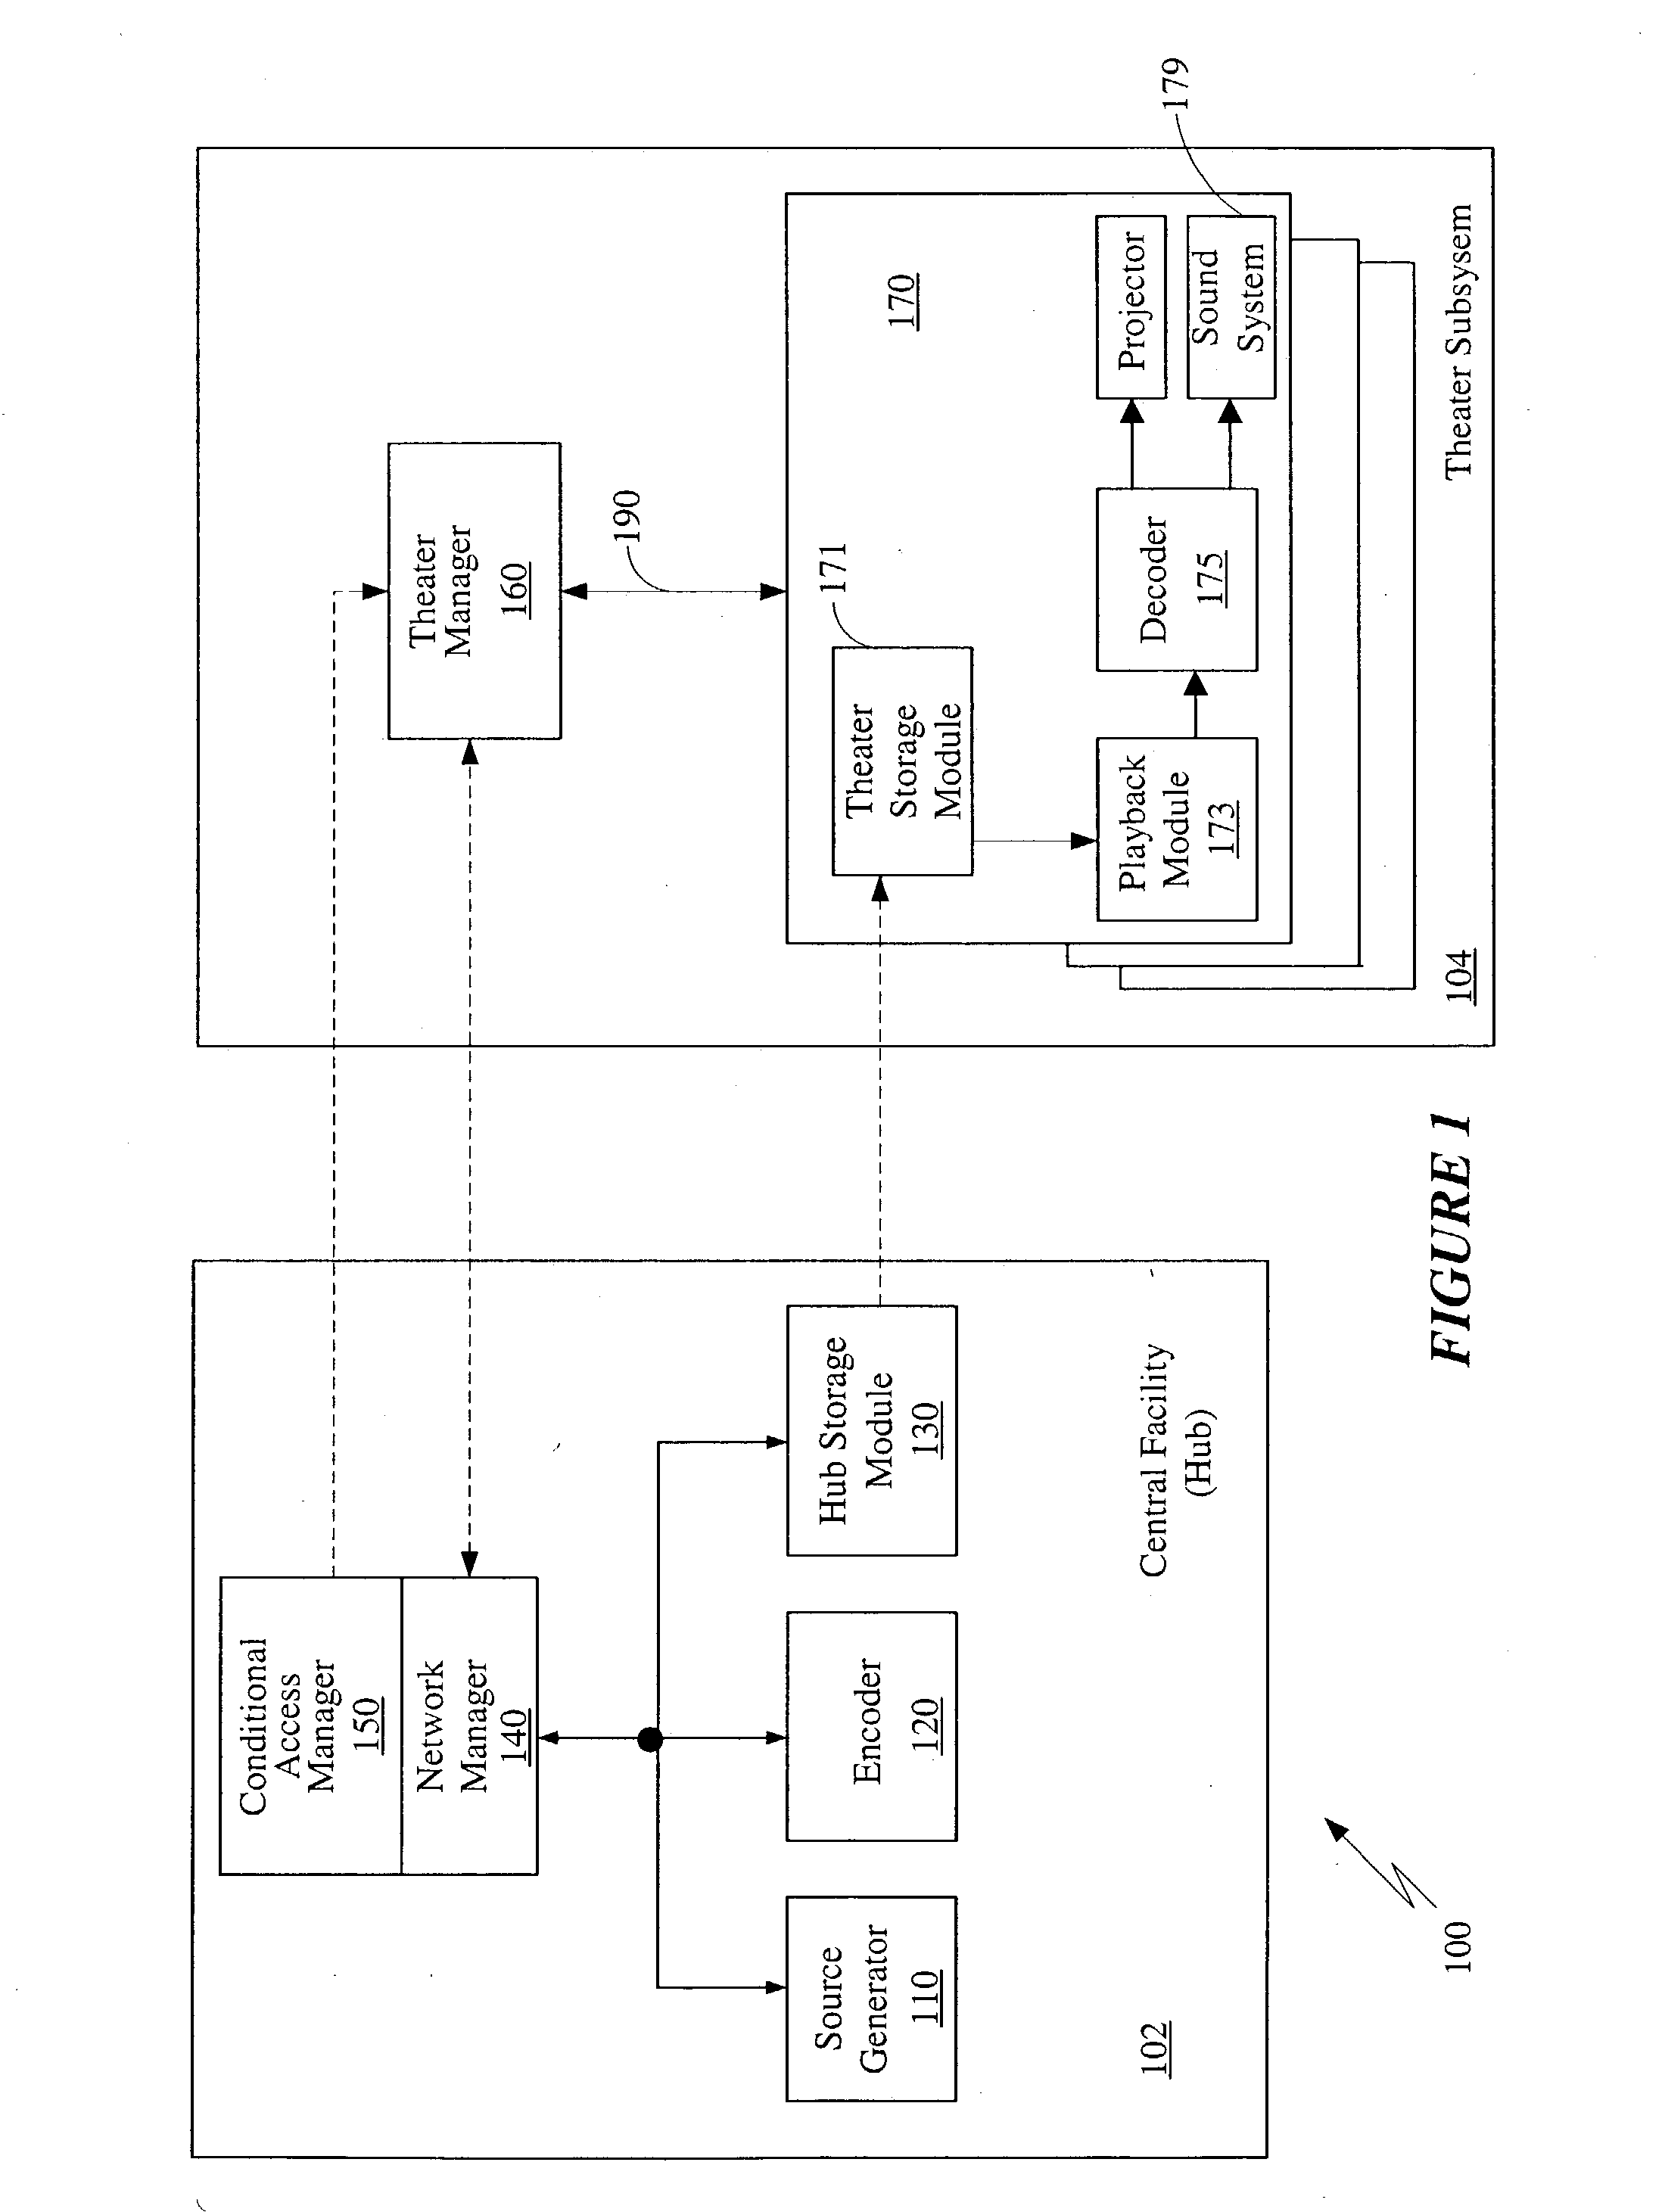 Apparatus and method for detecting error in a digital image